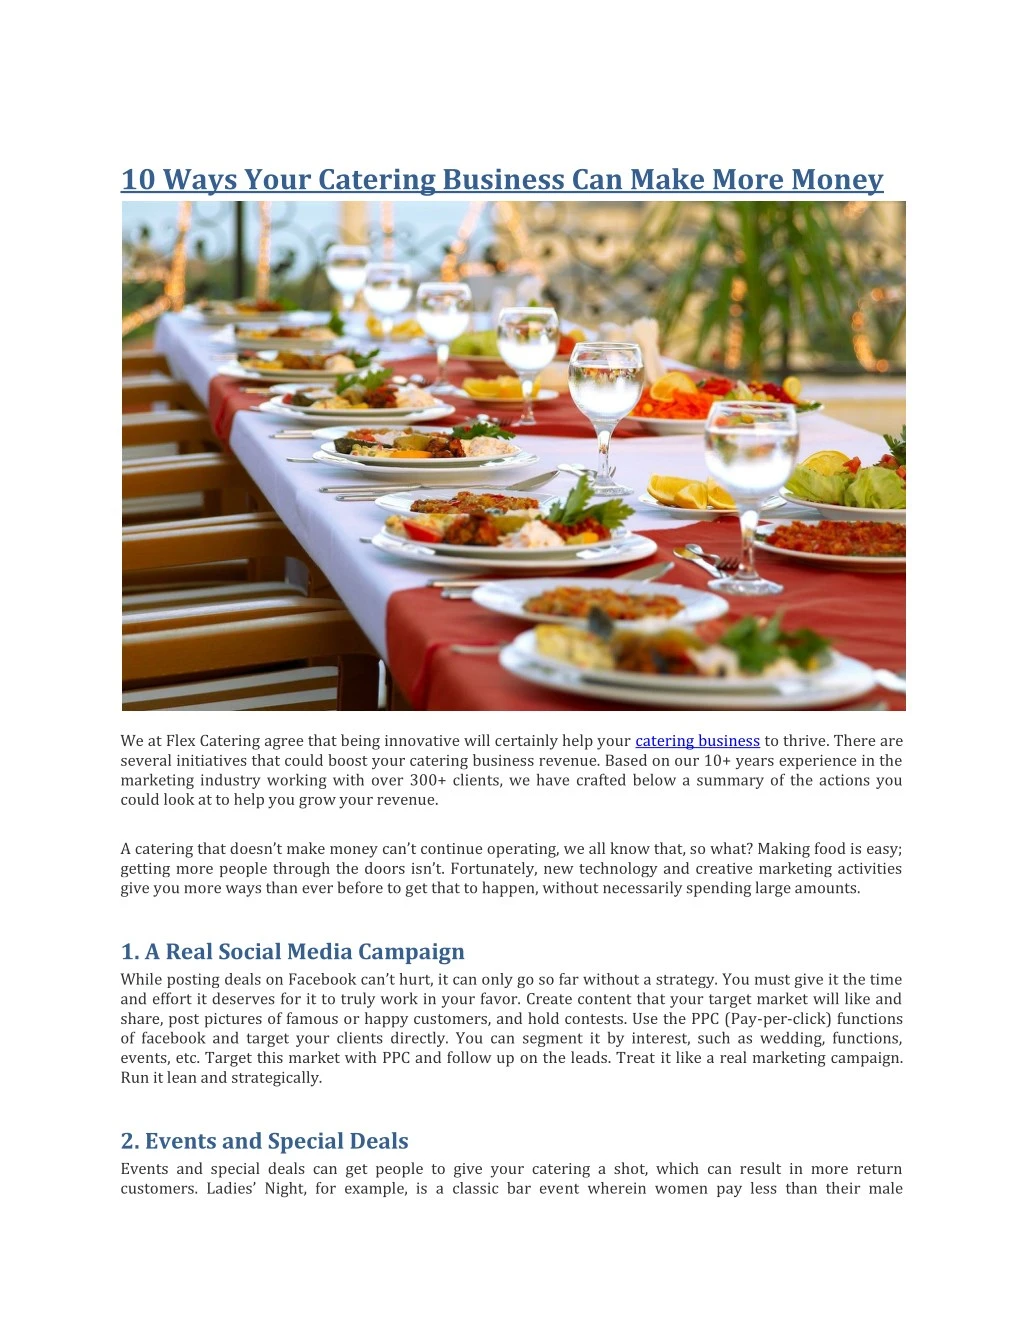 10 ways your catering business can make more money